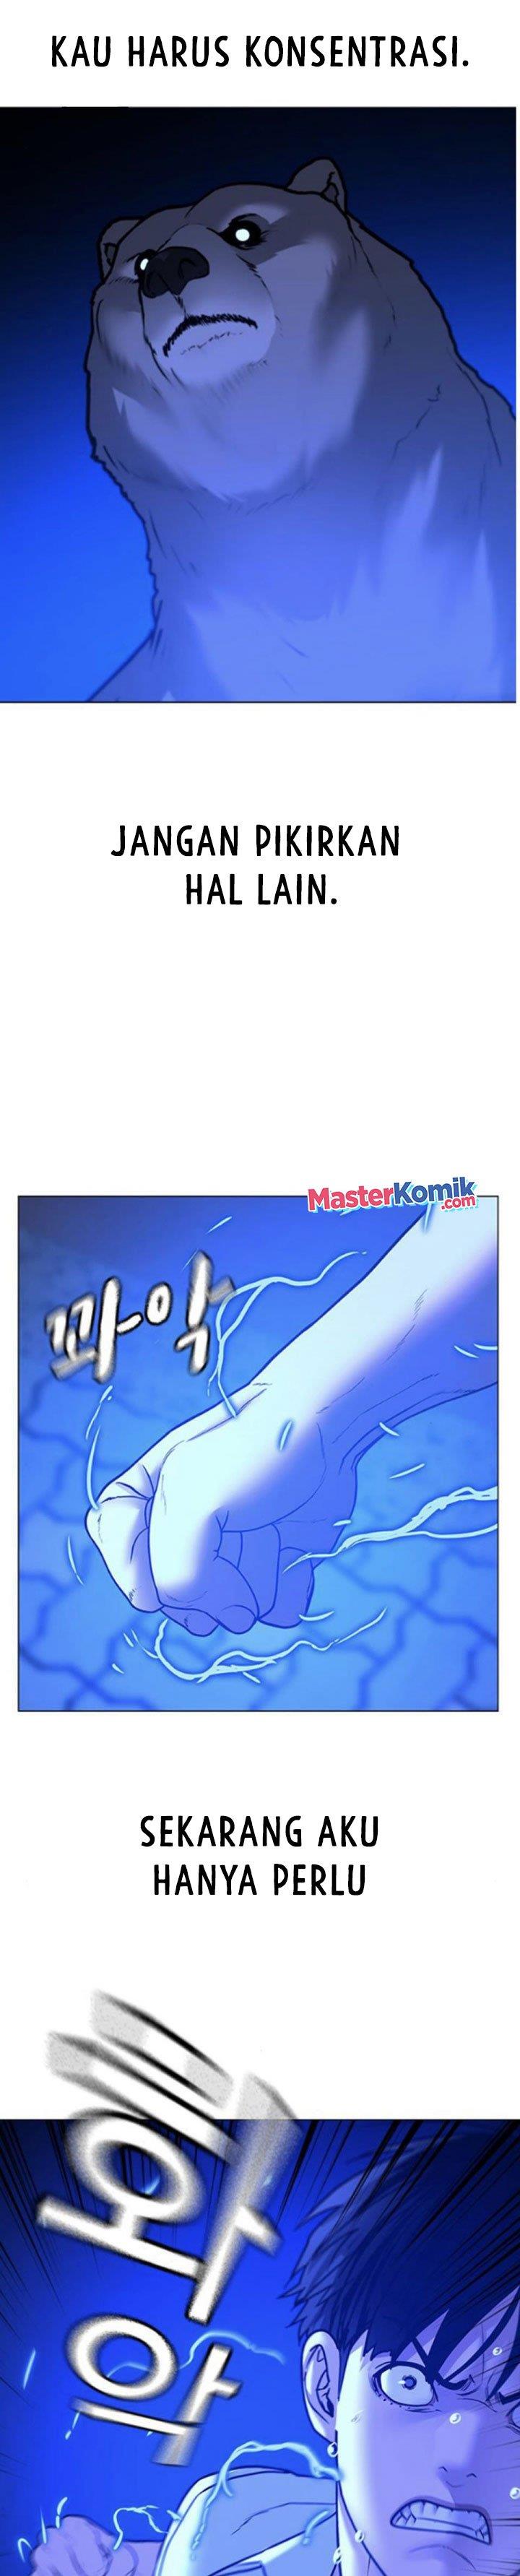 Reality Quest Chapter 47